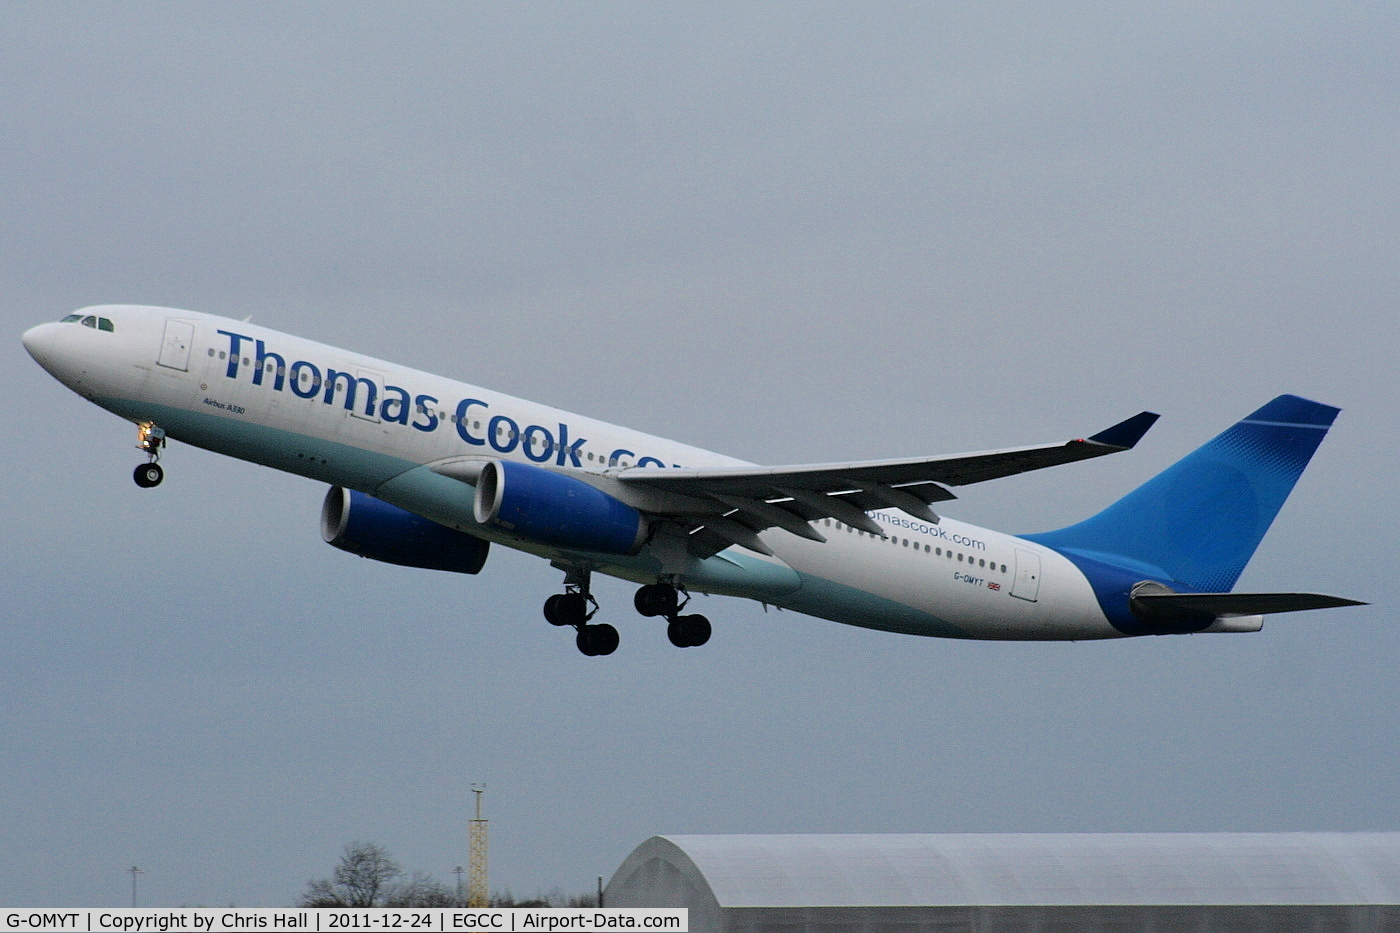 G-OMYT, 1999 Airbus A330-243 C/N 301, missing the Thomas Cook logo on the tail after returning from lease with Garuda Indonesia